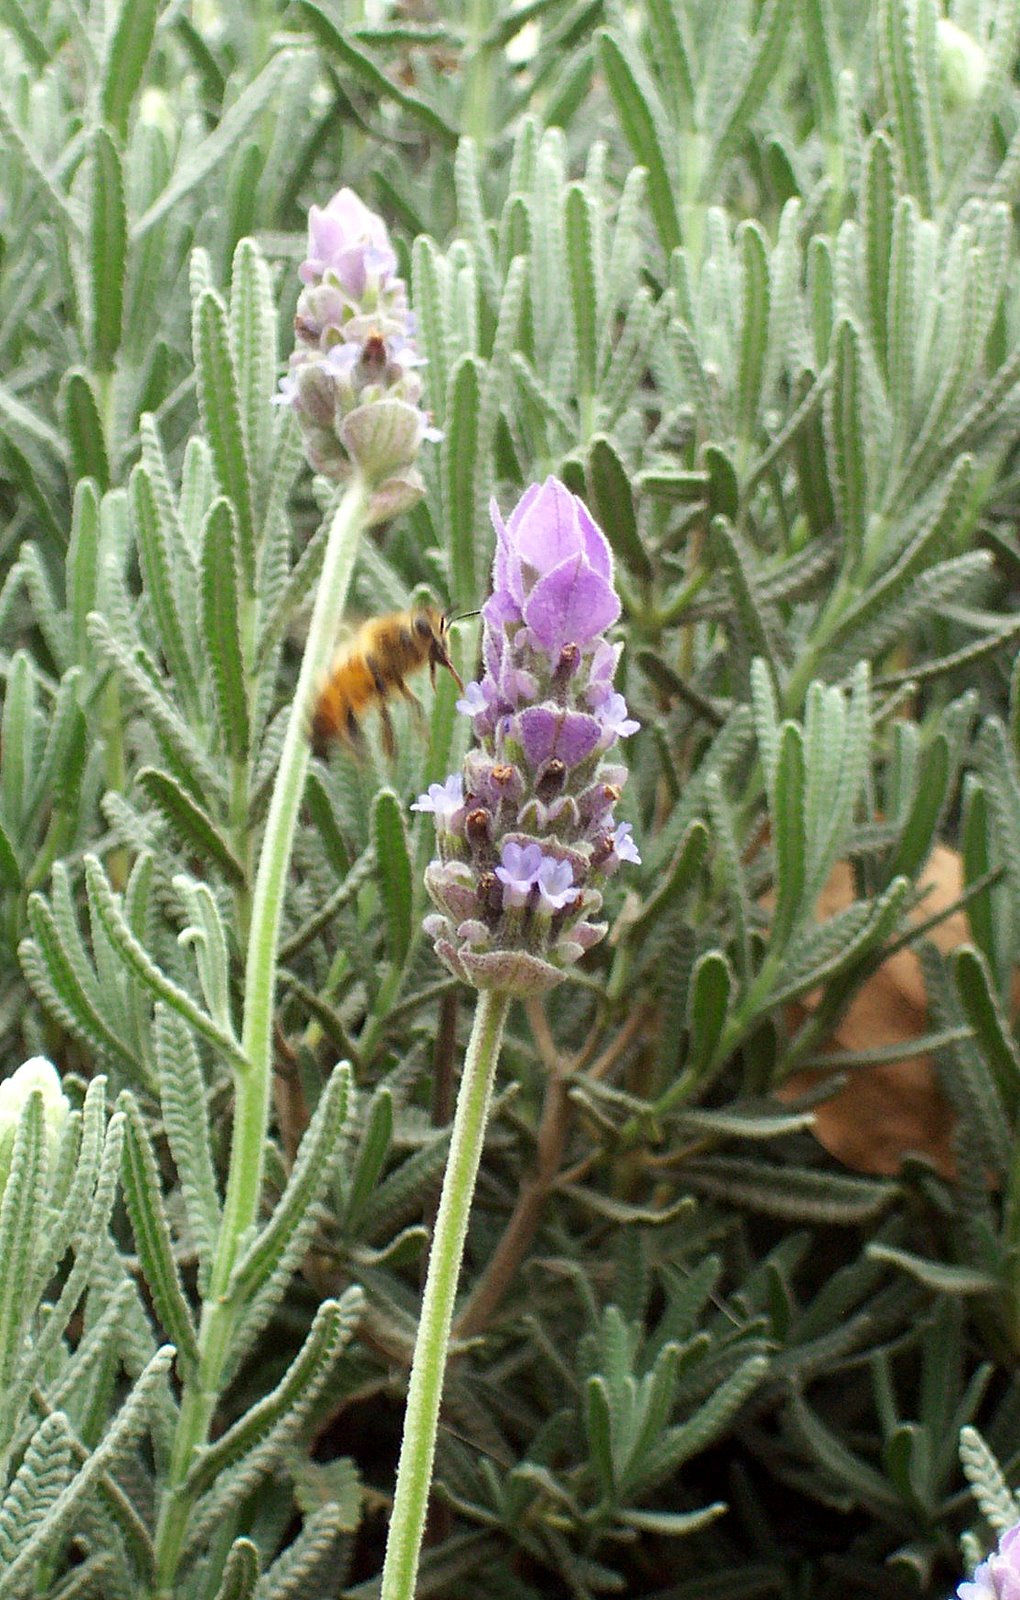 close-up (macro) shot of a honey bee landing on a lavender flower (blossom)